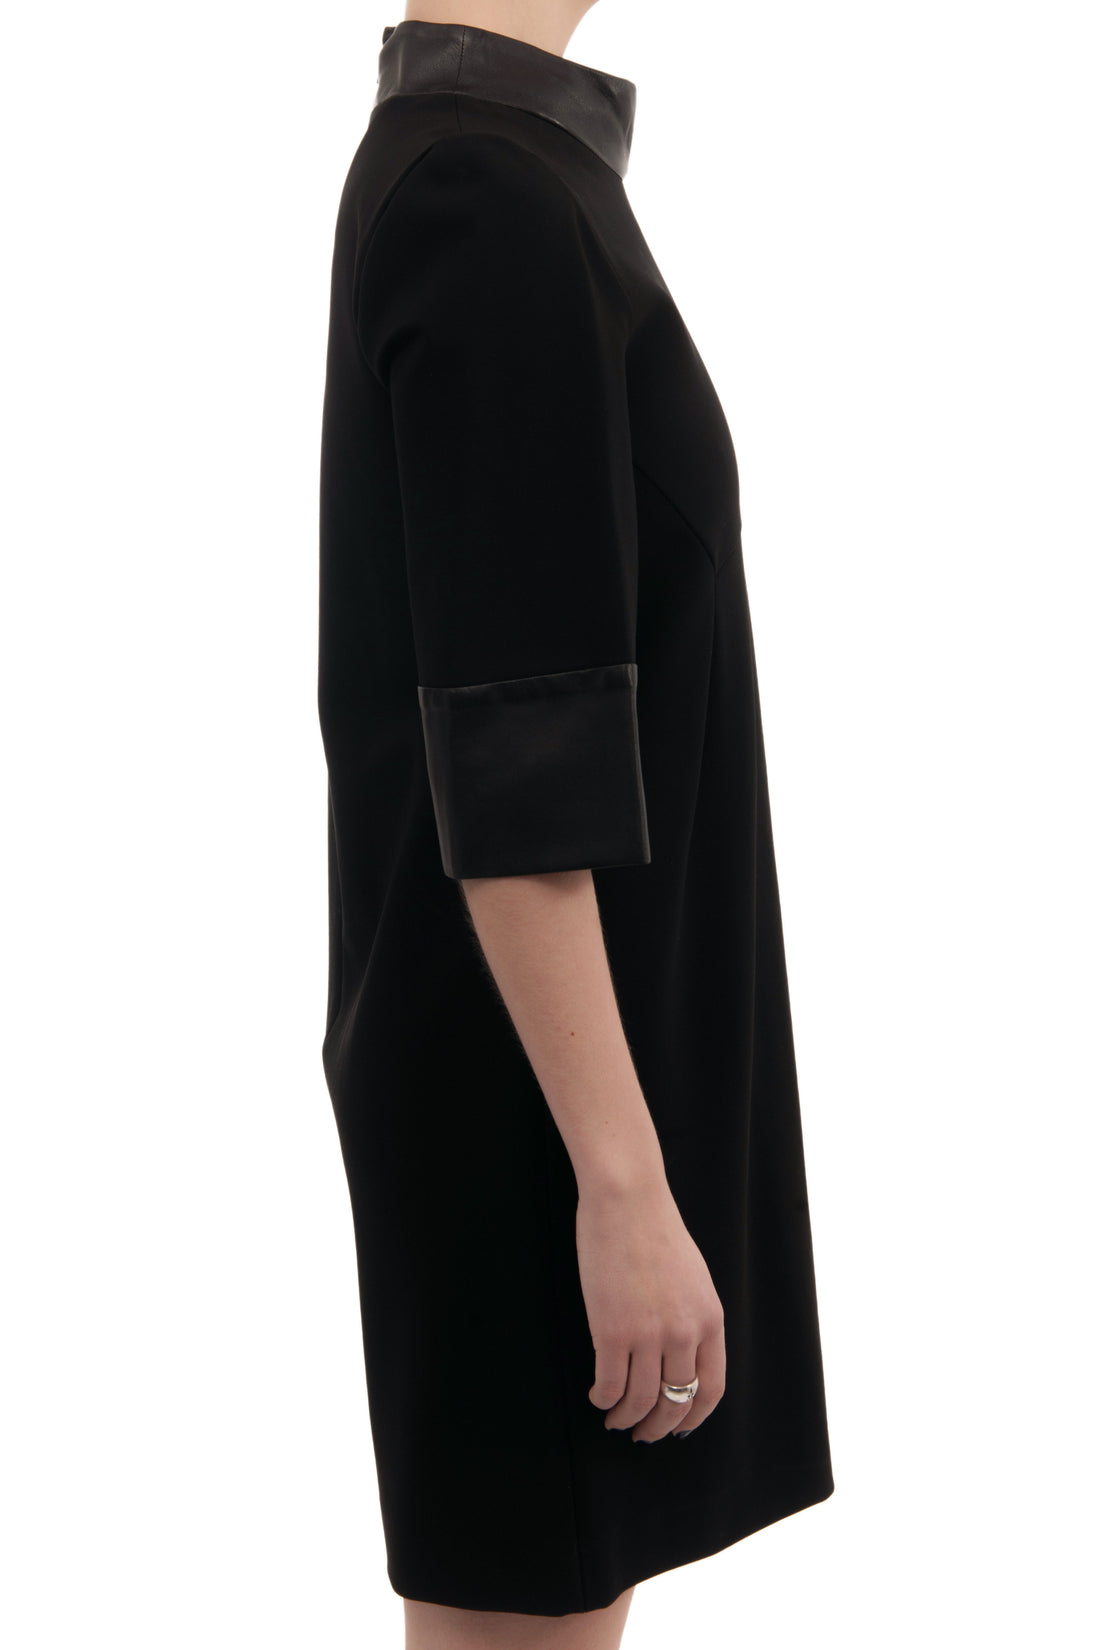 Gucci Black Stretch Crepe Dress with Leather Cuffs and Collar